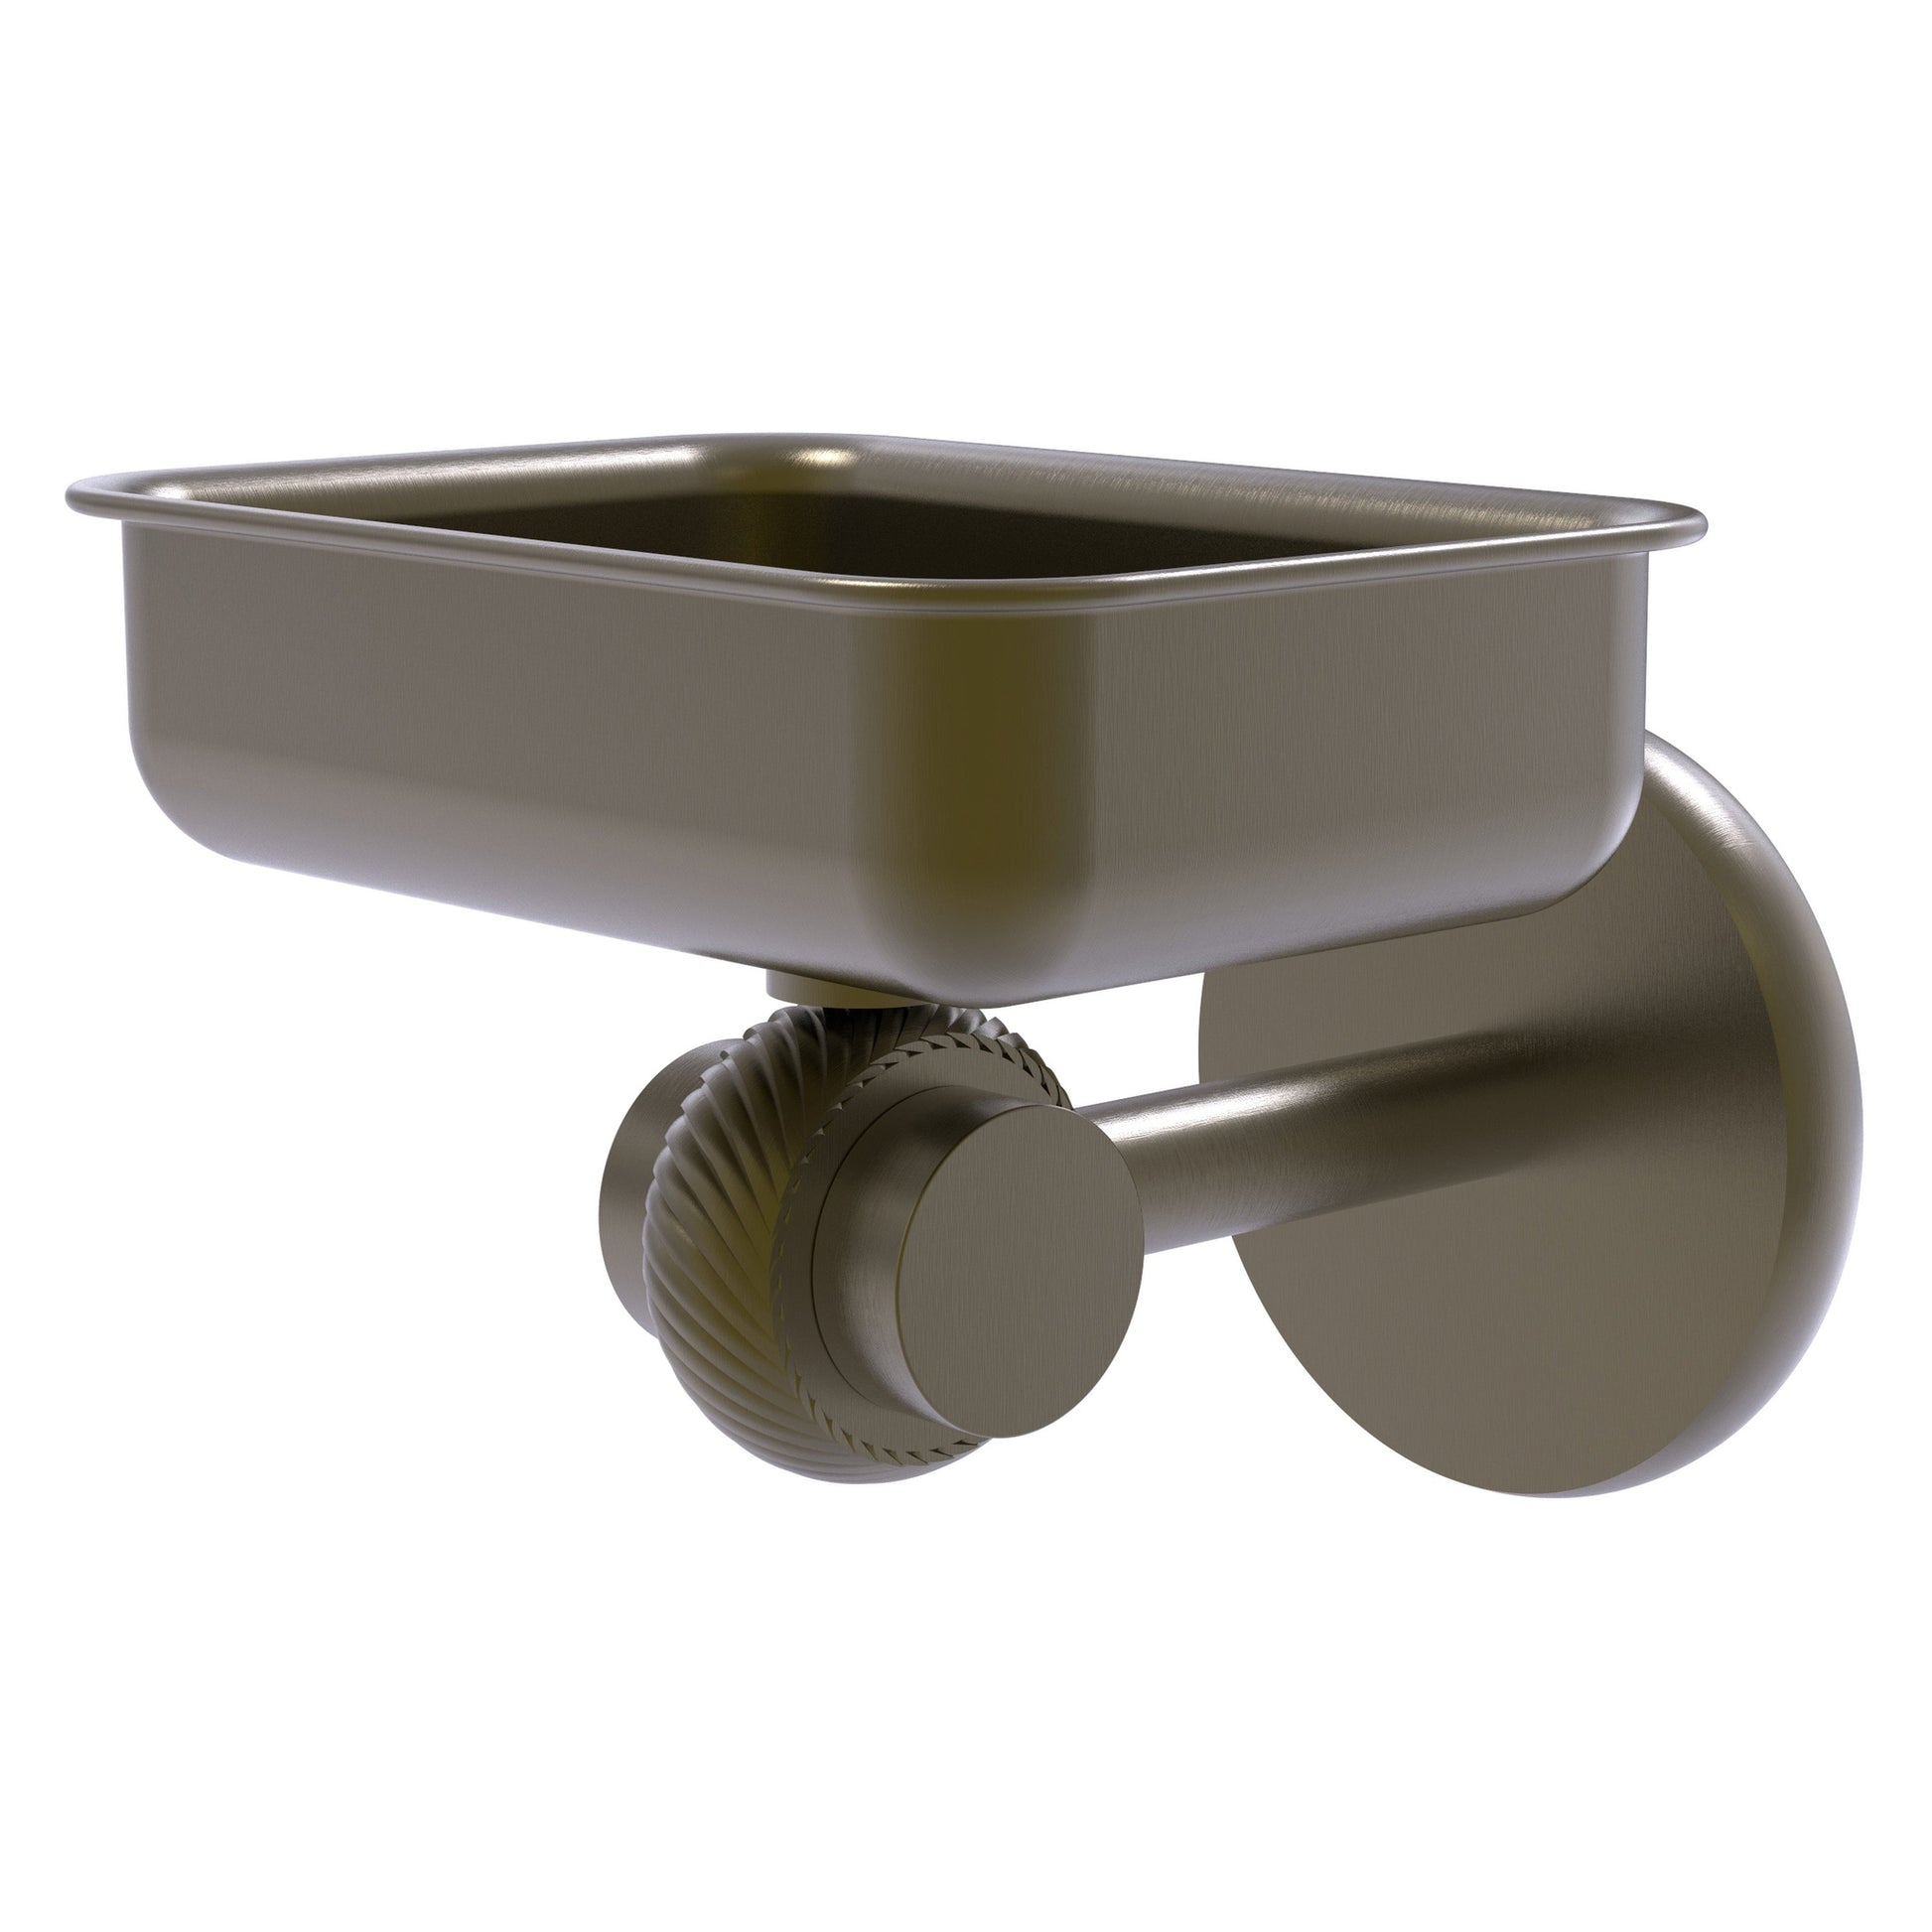 Allied Brass Satellite Orbit Two 4.5" x 3.5" Antique Brass Solid Brass Wall-Mounted Soap Dish With Twisted Accents